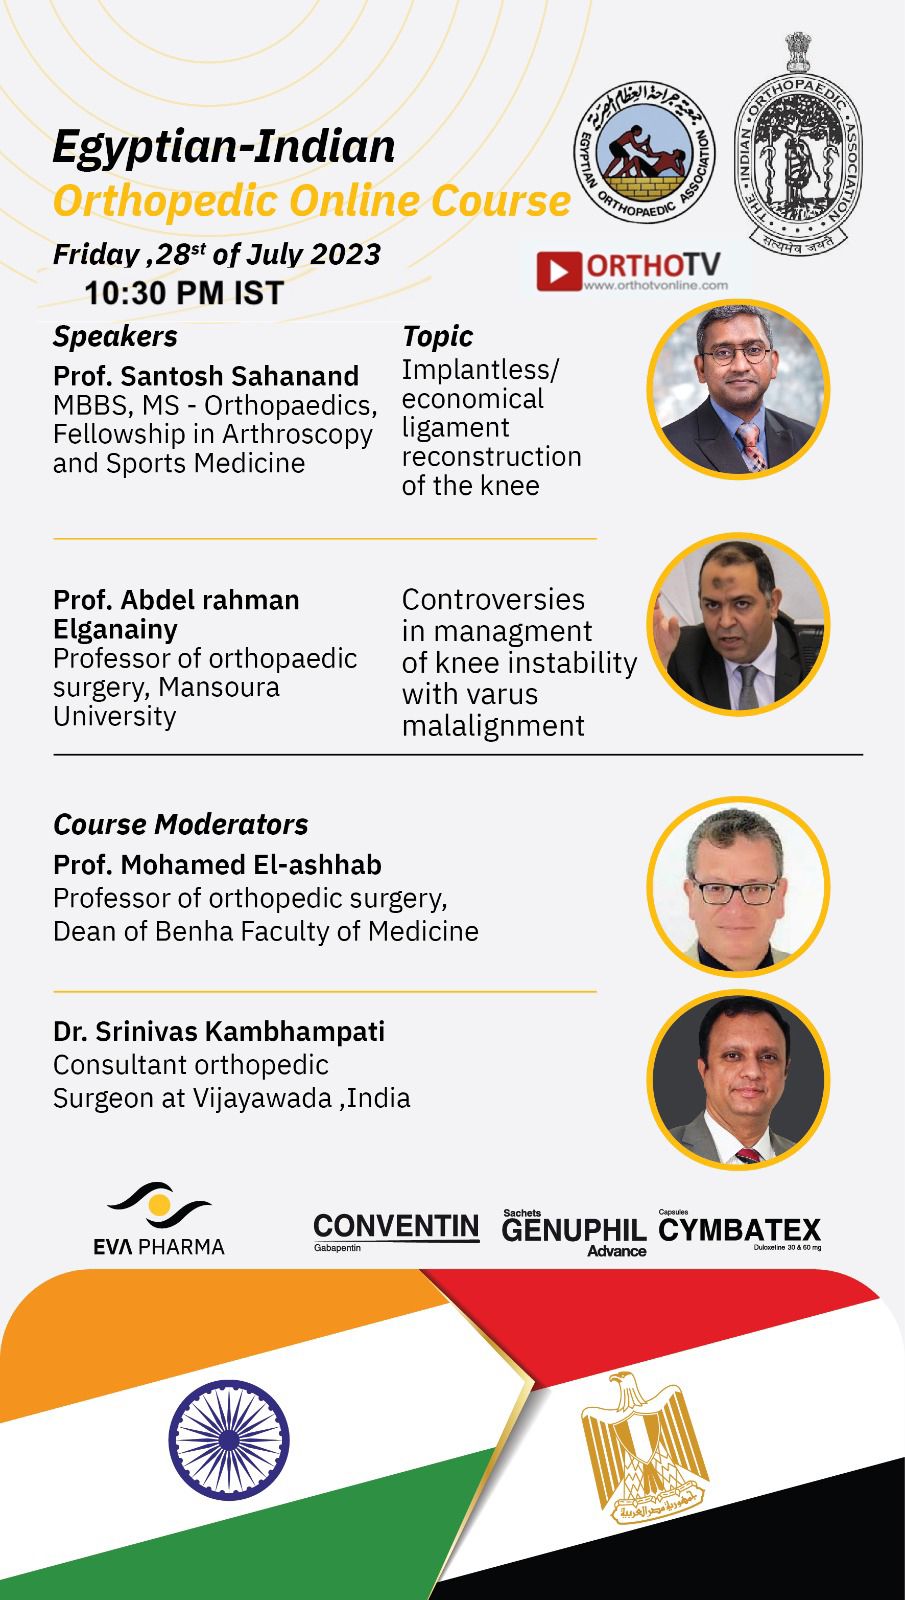 Egyptian-Indian Orthopedic Online Course : Egyptian-Indian Orthopedic Online Course - Prof. Santosh Sahanand